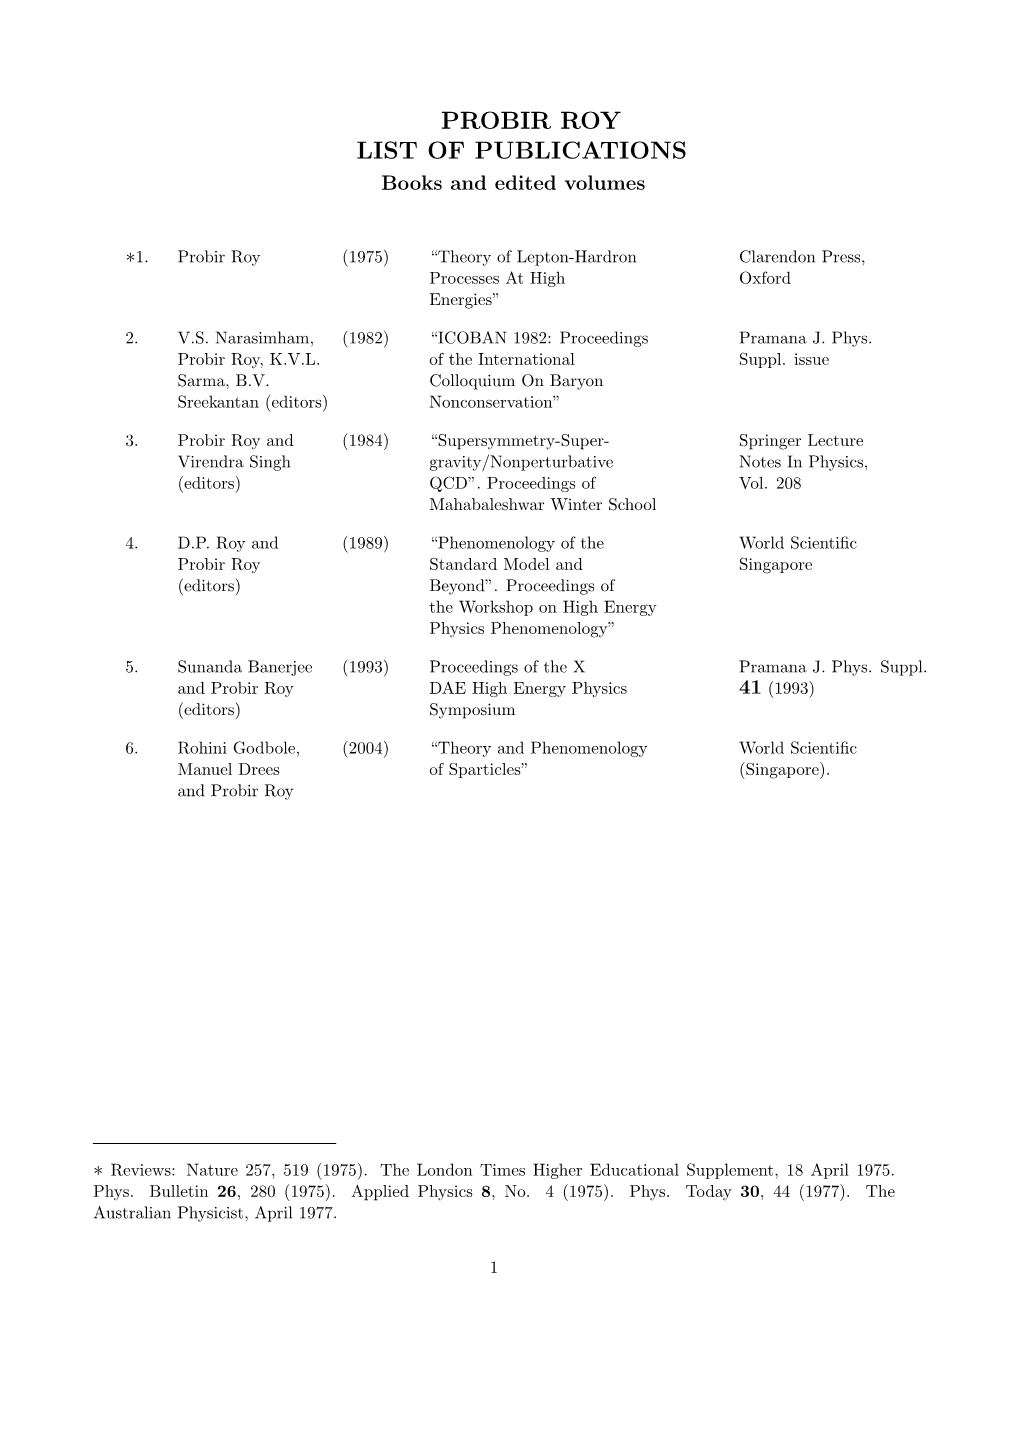 PROBIR ROY LIST of PUBLICATIONS Books and Edited Volumes